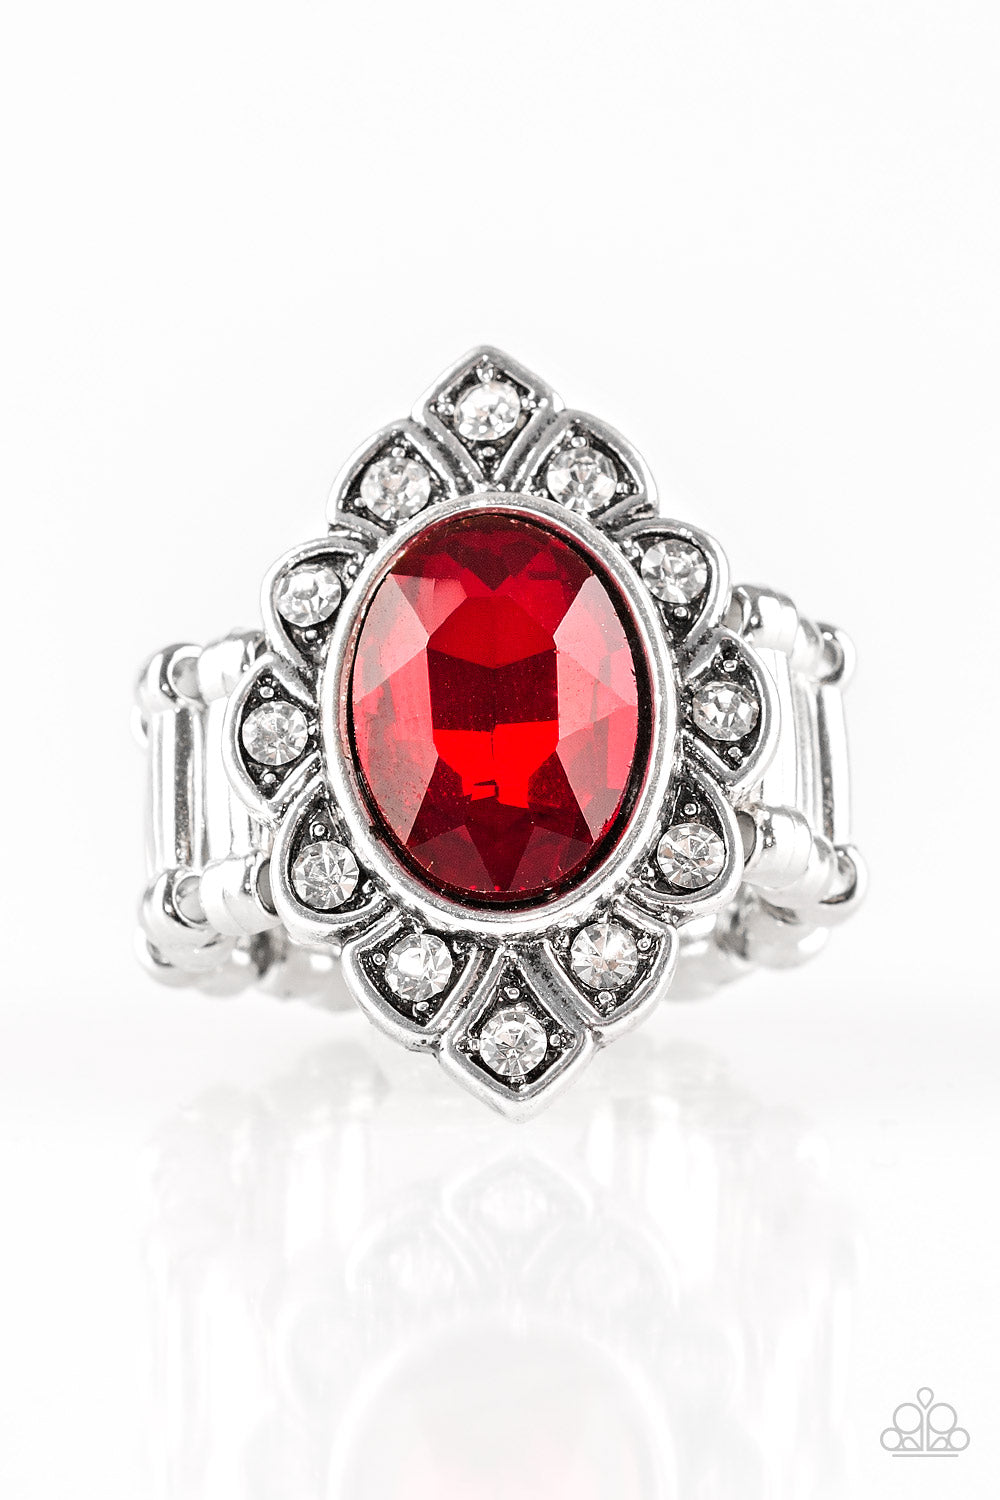 POWER BEHIND THE THRONE - RED OVAL RUBY RHINESTONE RING